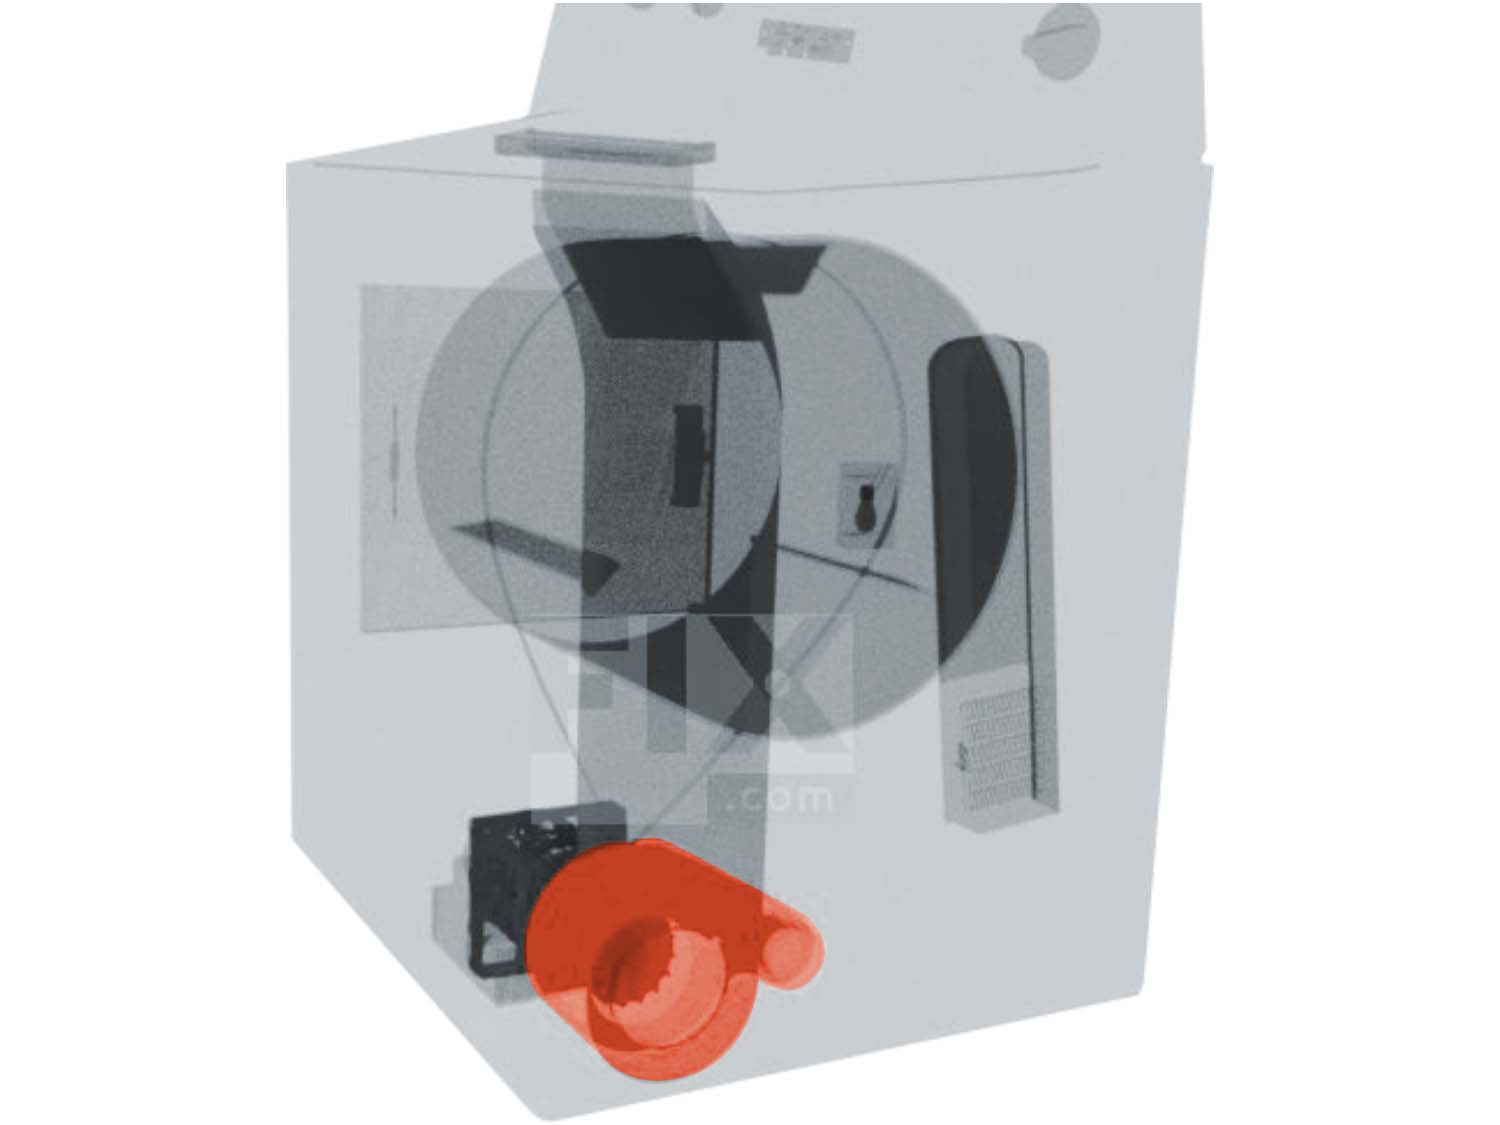 A 3D diagram showing the components of a dryer and specifying the location of the blower wheel